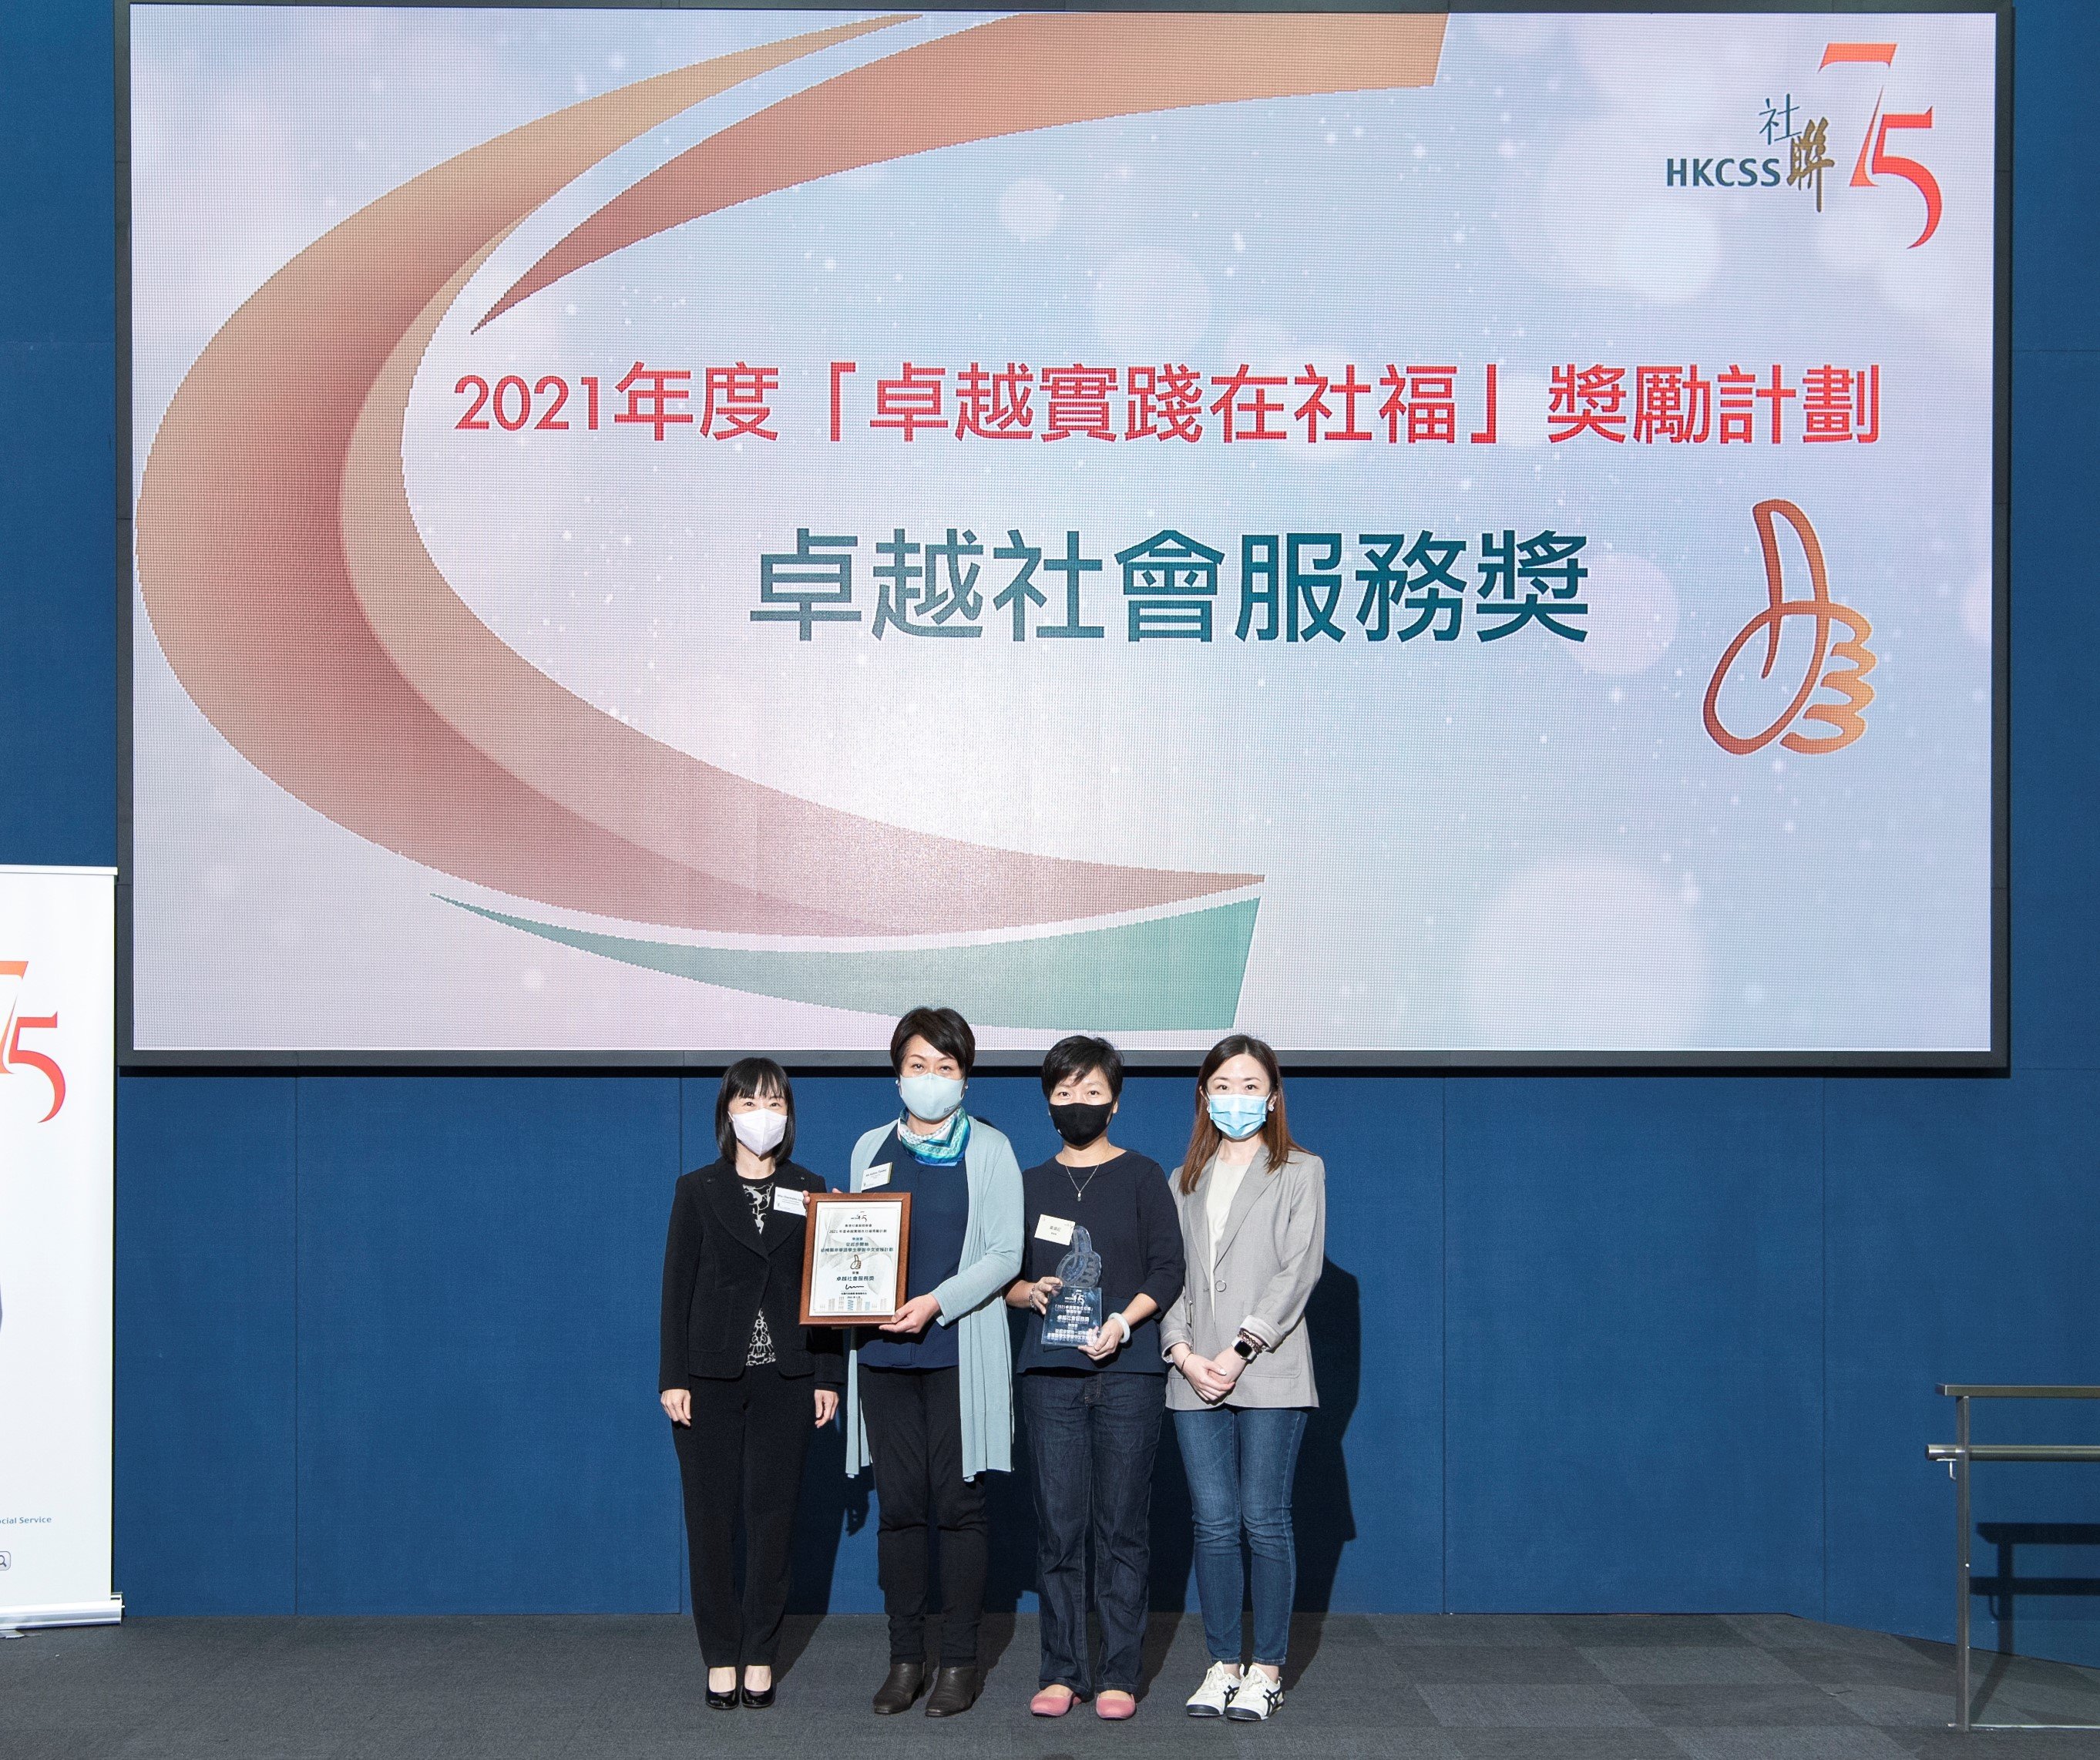 Through the 2021 Best Practice Awards in Social Welfare, Oxfam’s project was recognised for its outstanding performance in the social sector. The award was presented by the Director of Social Welfare, Lee Pui-sze (first from the left).